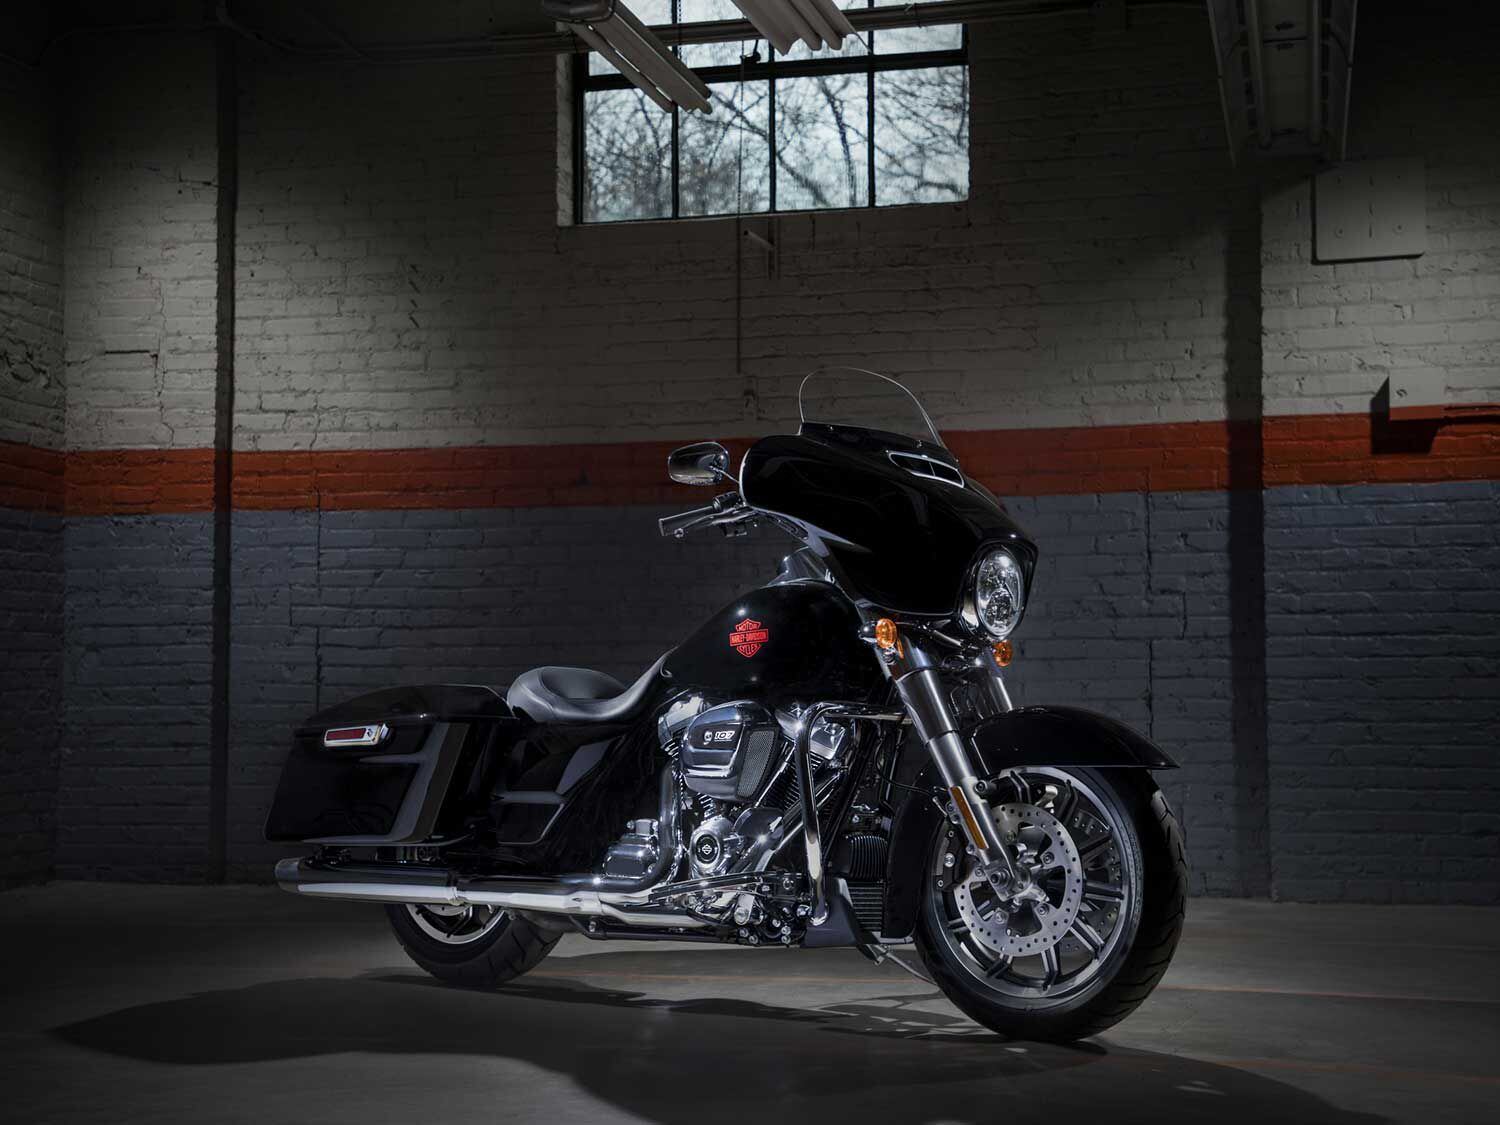 Say hello to the lowest priced offering in Harley’s Touring line.